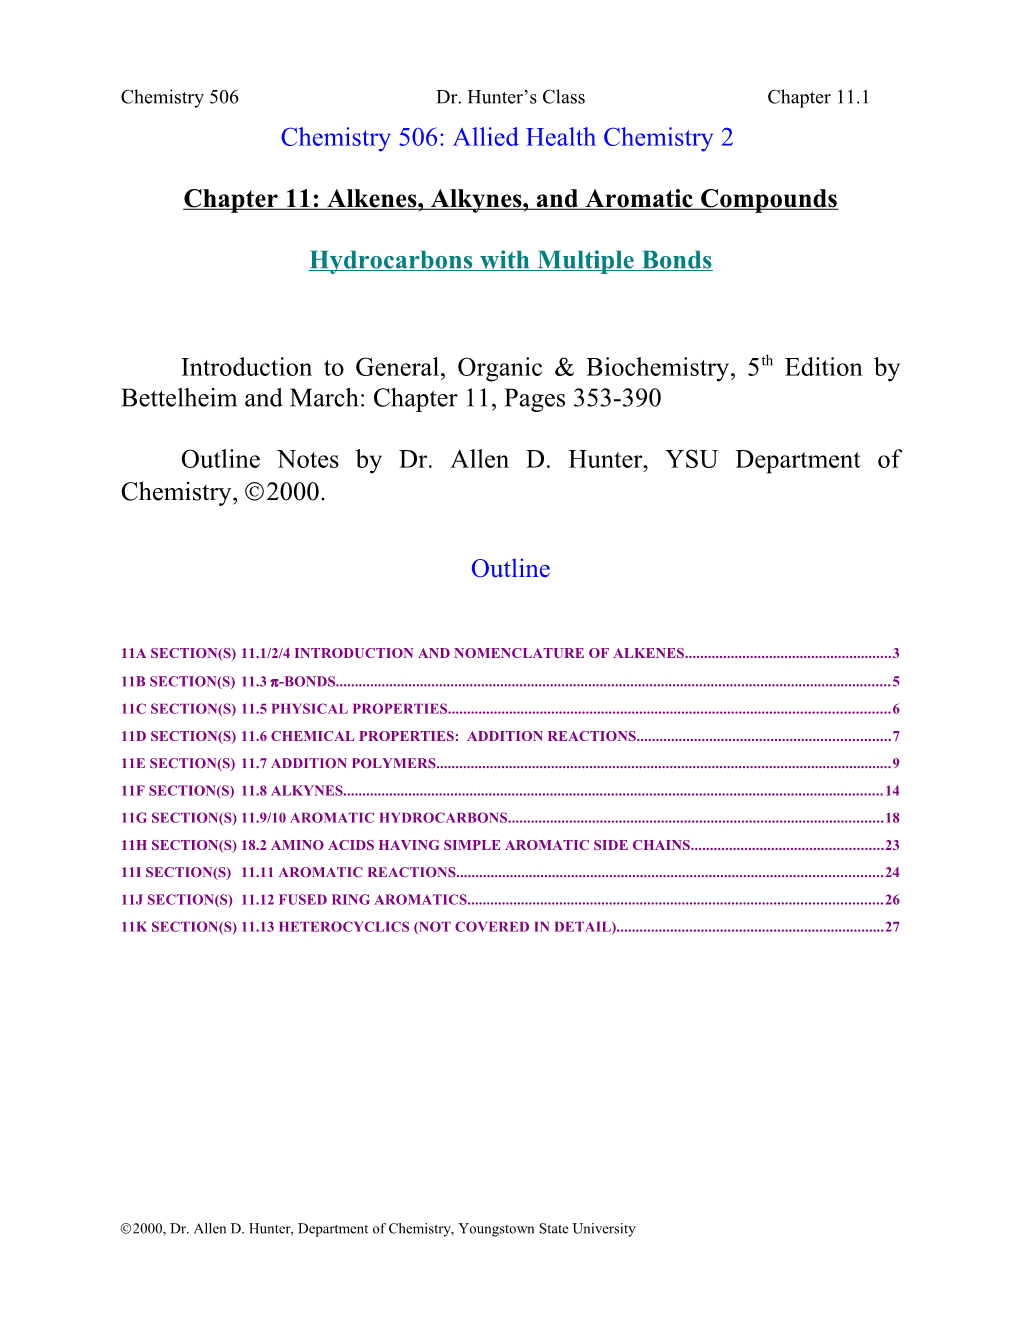 Chapter 11: Alkenes, Alkynes, and Aromatic Compounds